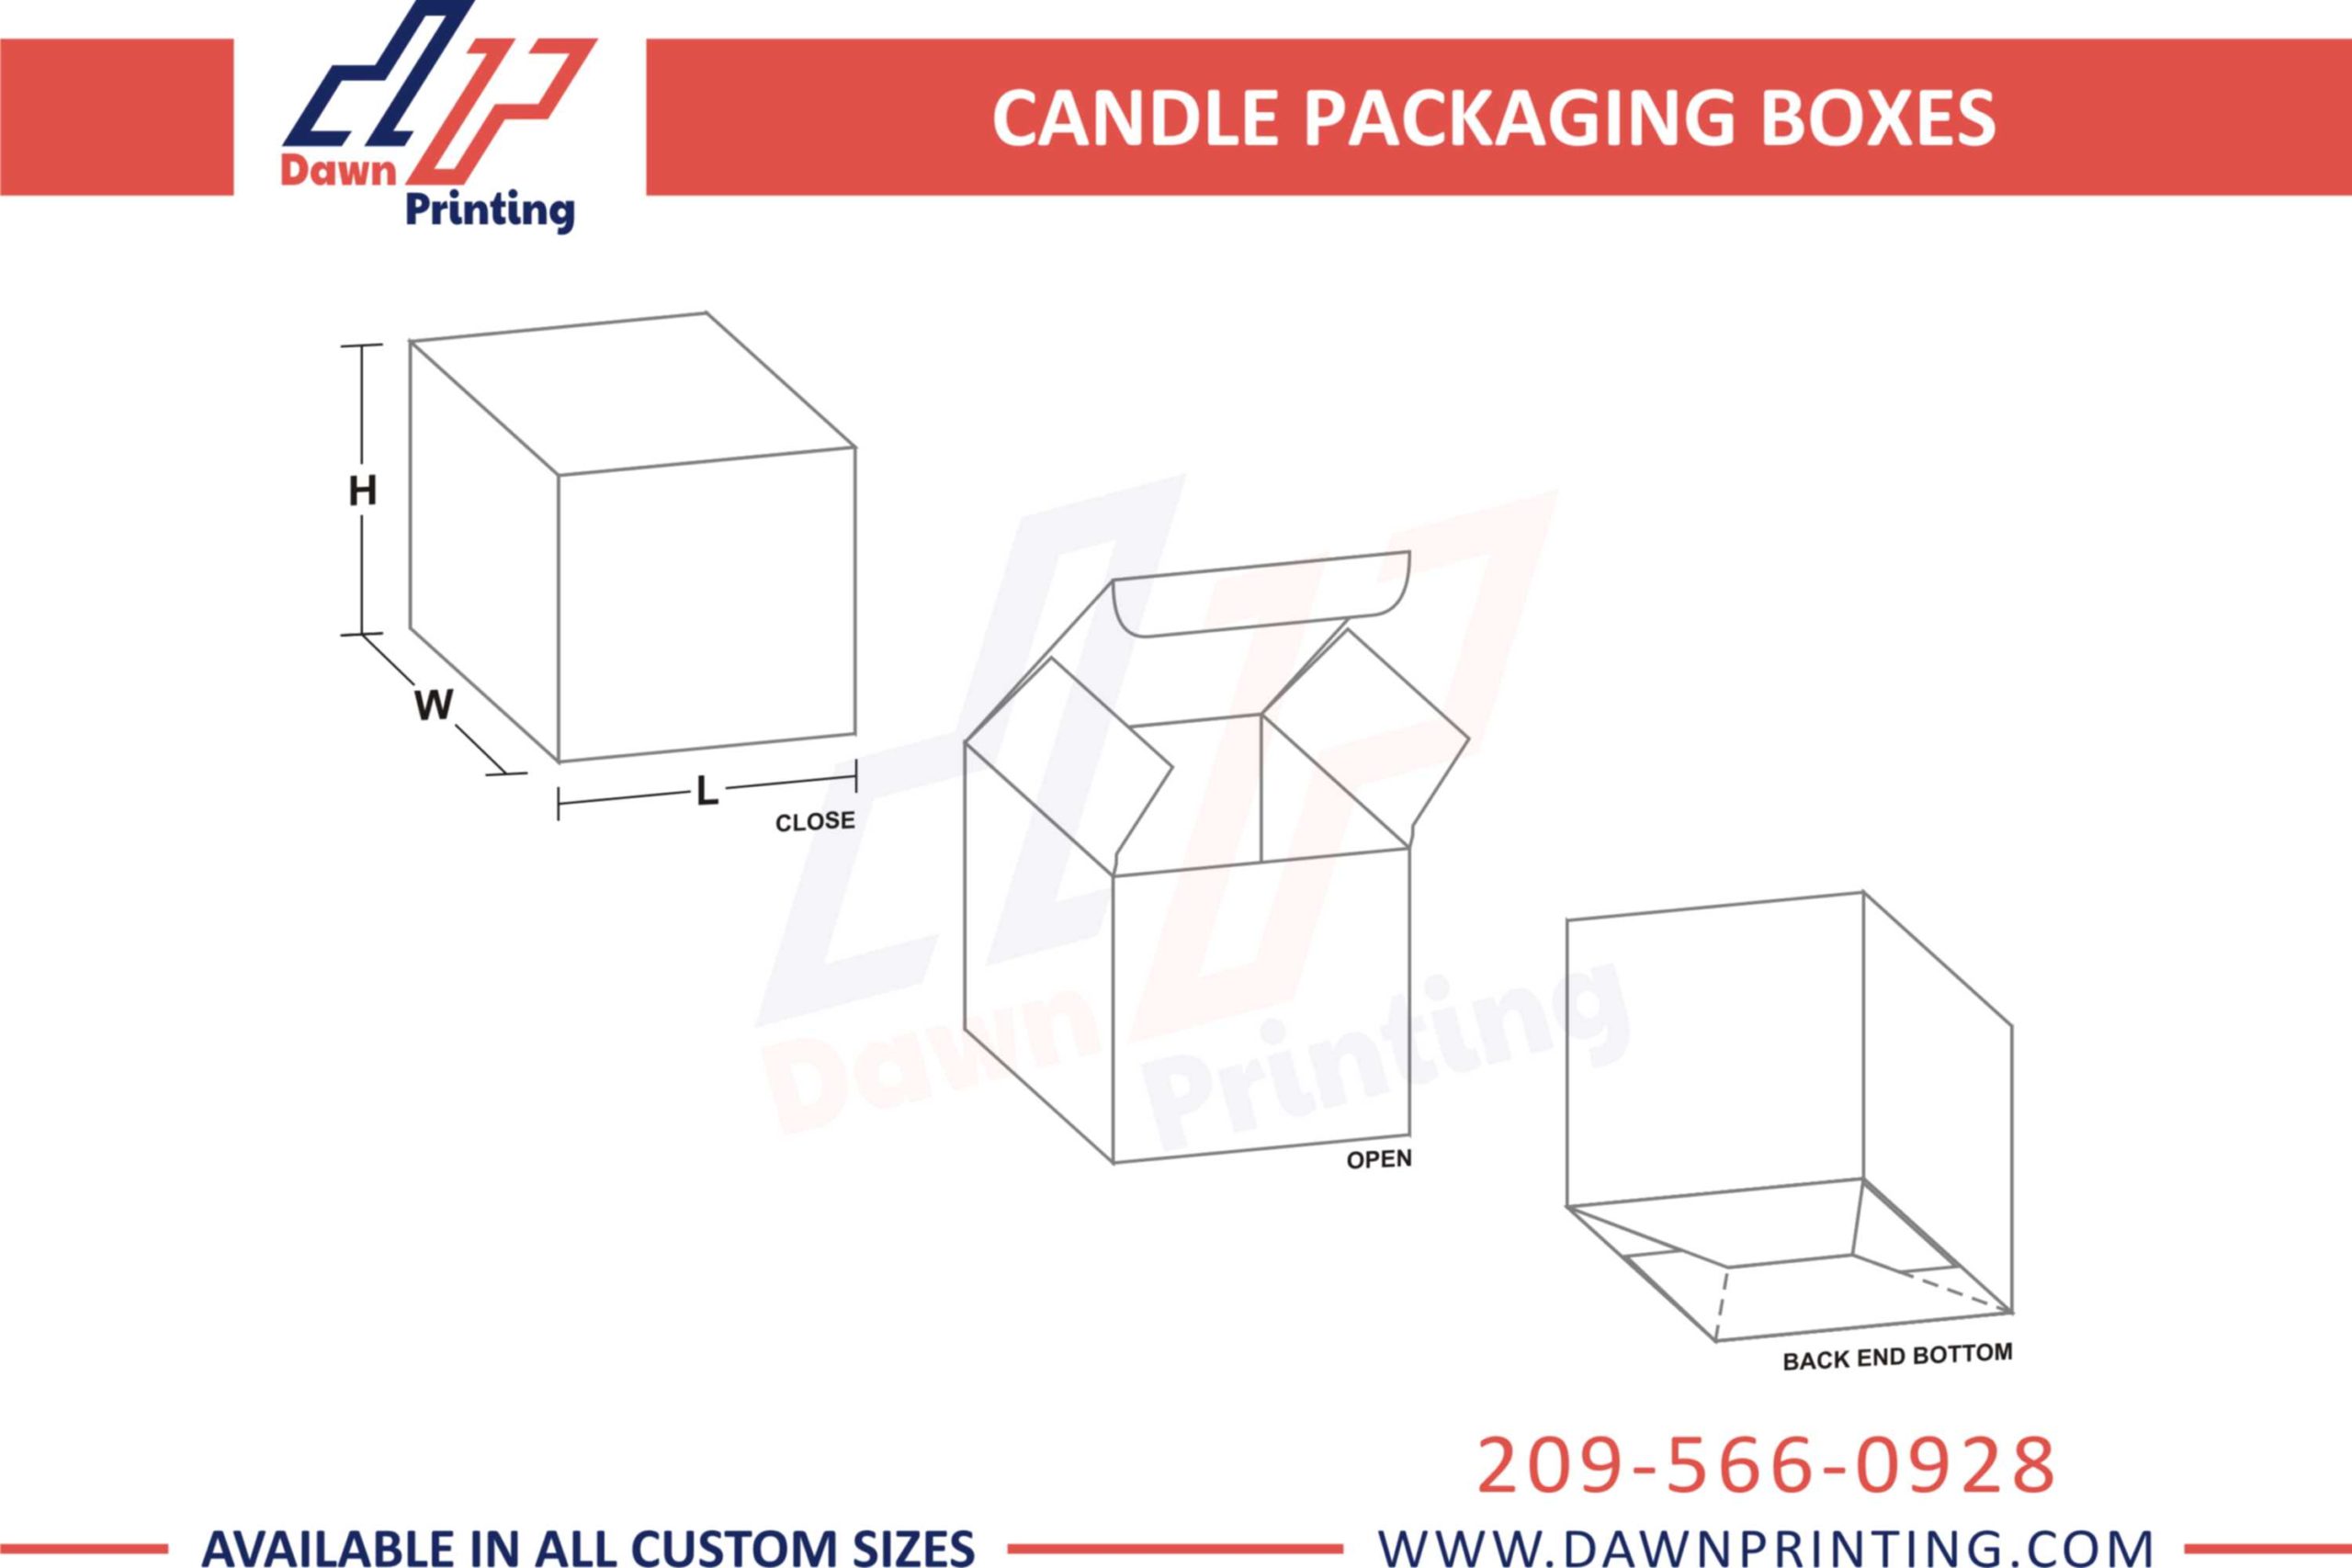 3D Candle Boxes - Dawn Printing